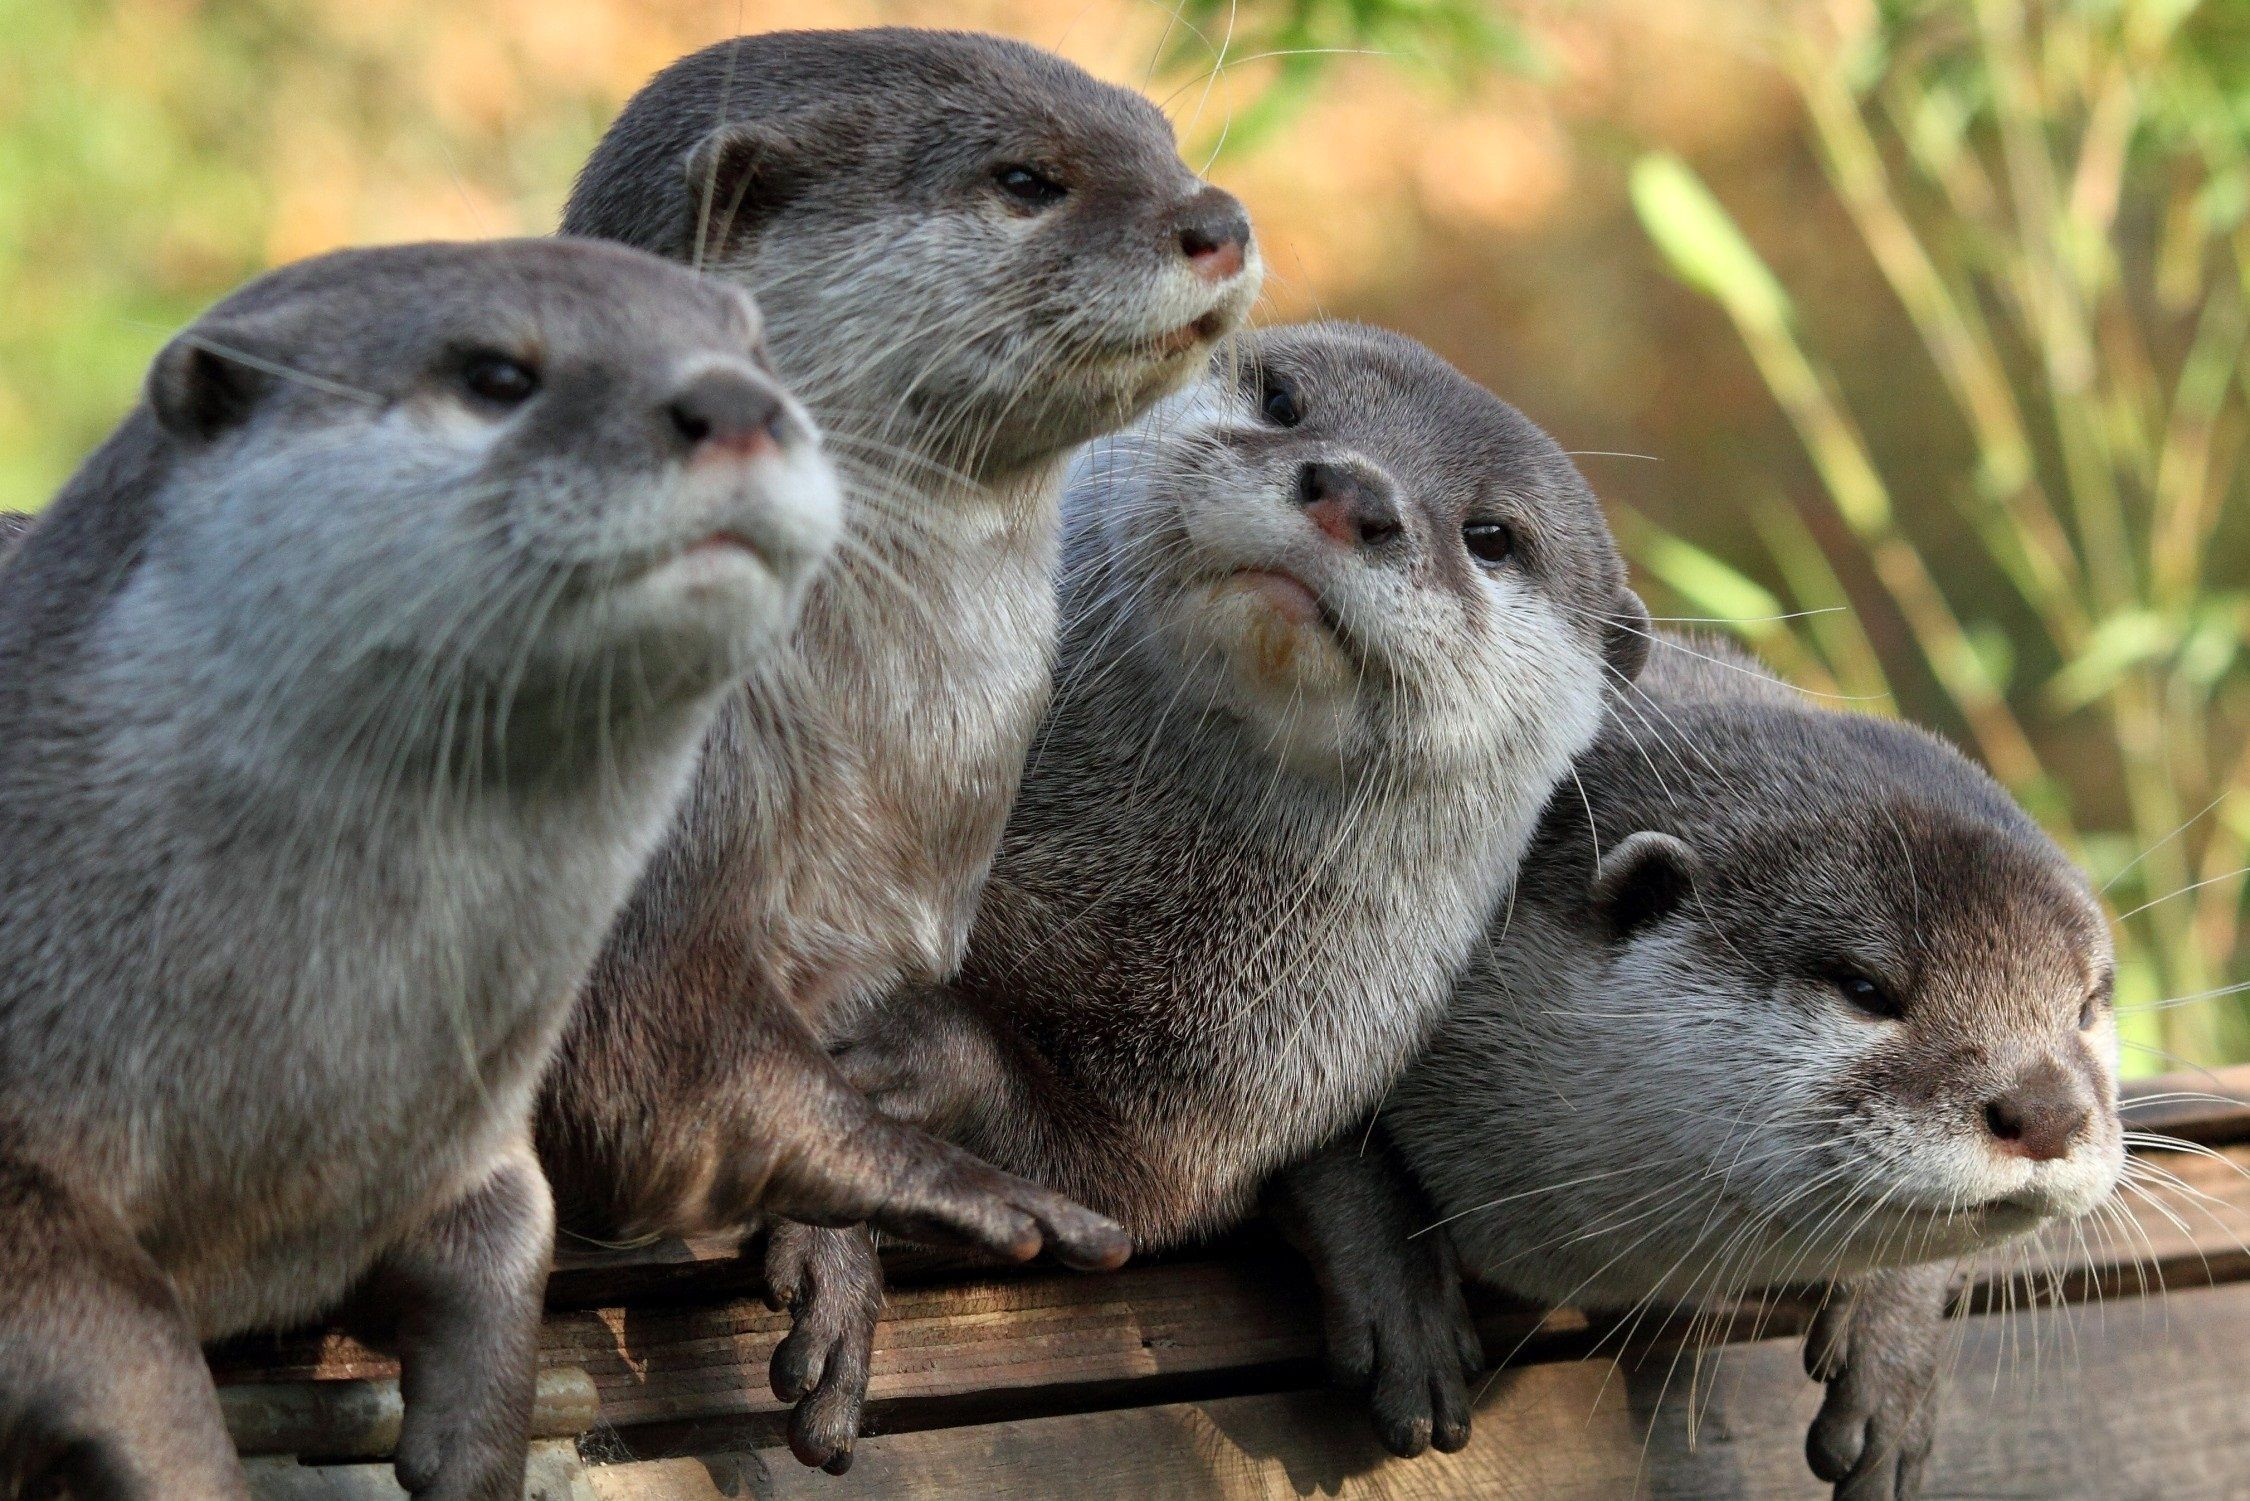 River Otter Wallpaper. Otters cute, Otter facts, Animals